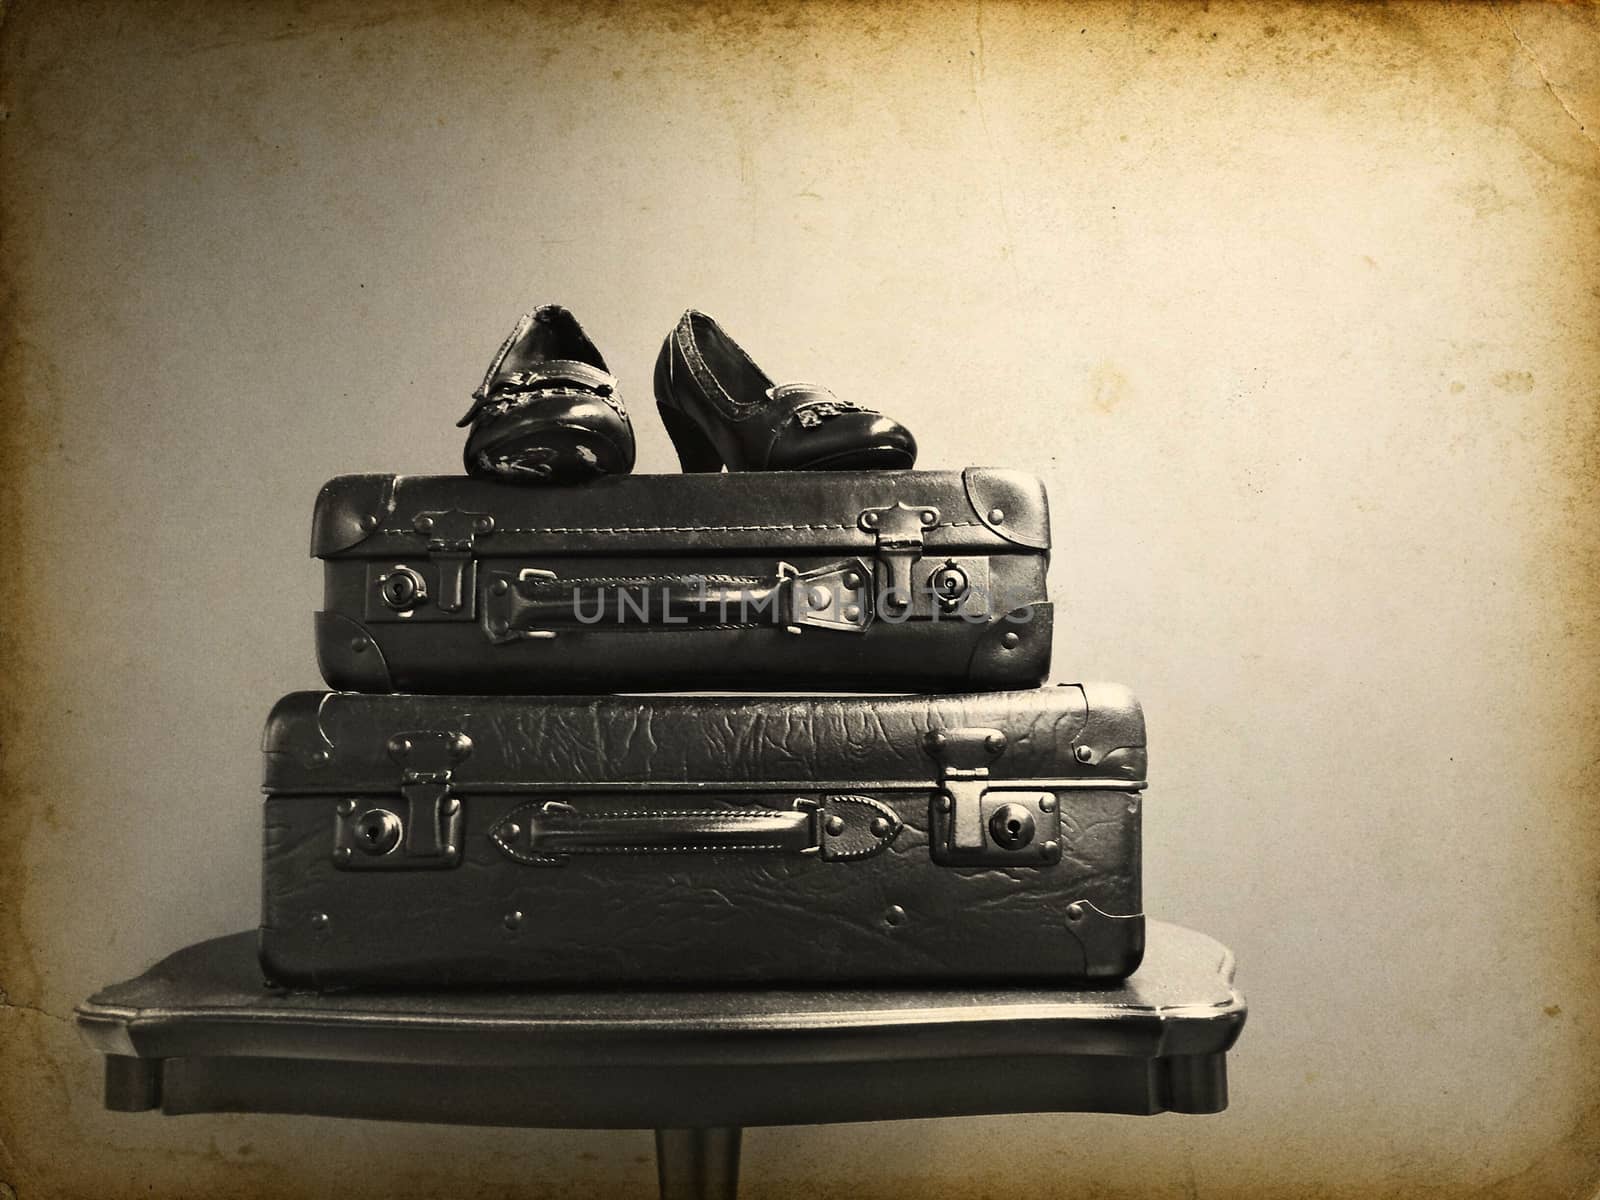 Vintage suitcases and shoes on a table. Retro style photo.